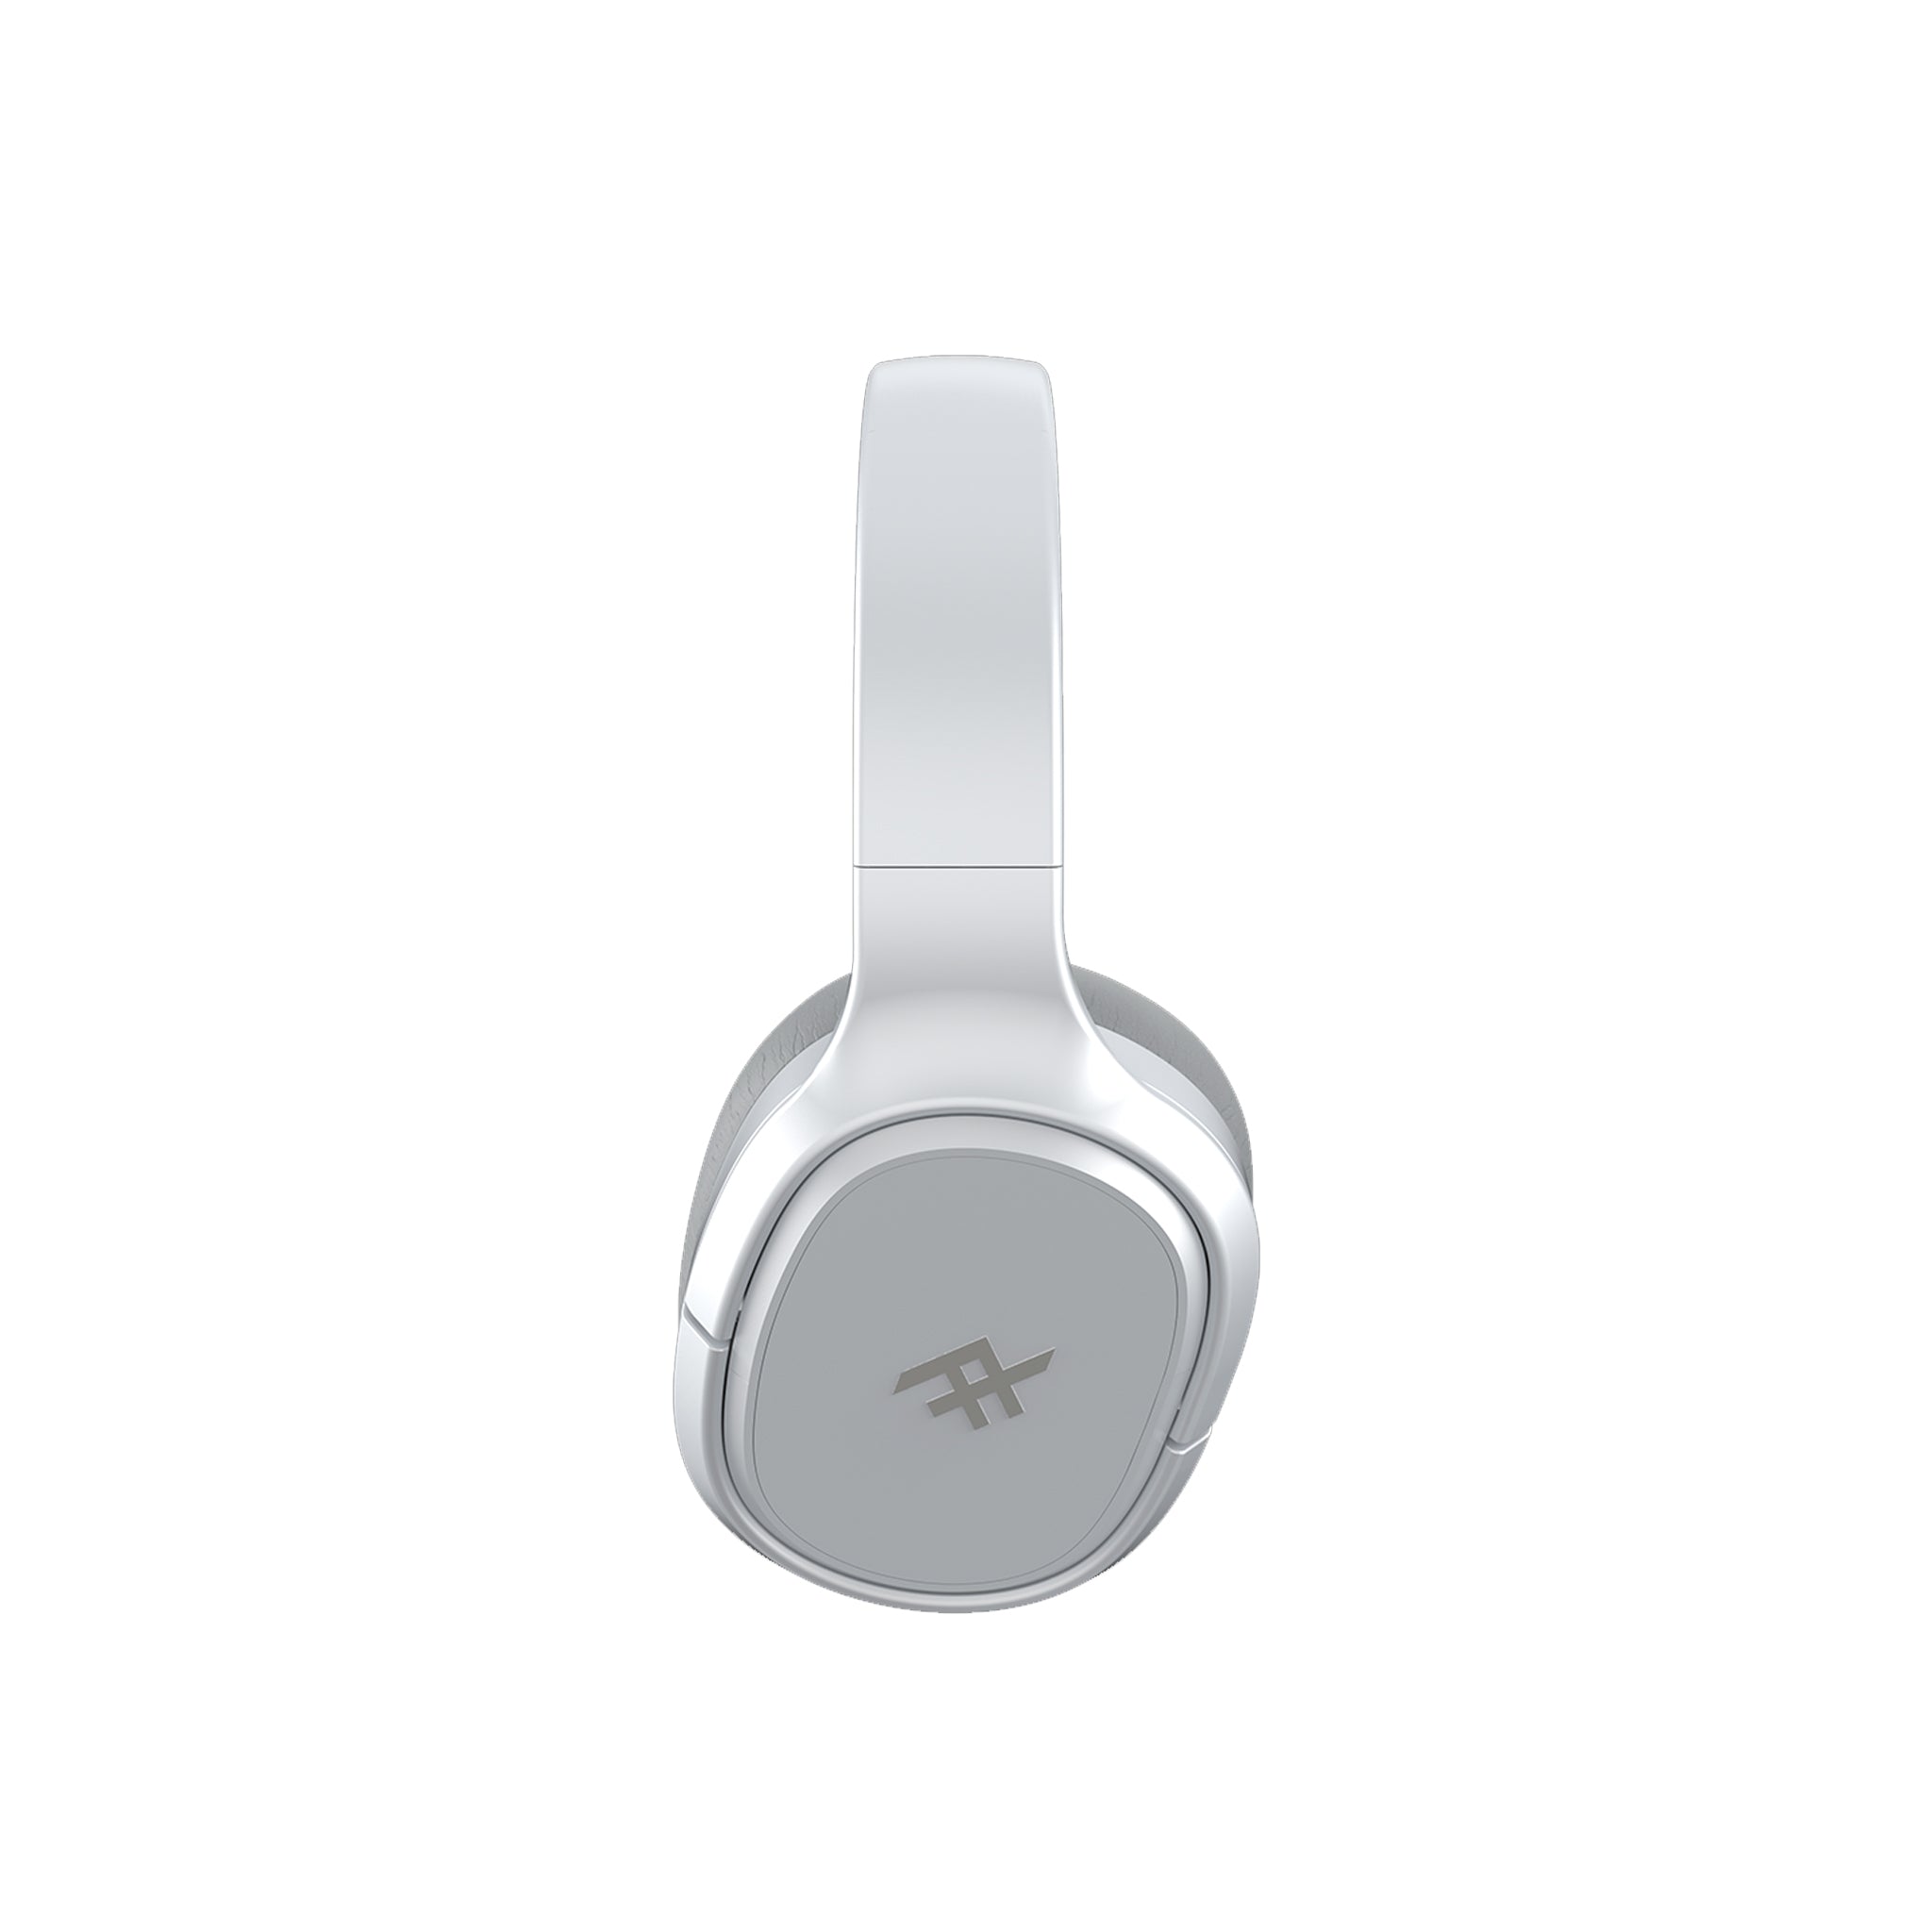 Ifrogz - Airtime Vibe Over Ear Bluetooth Headphones - White